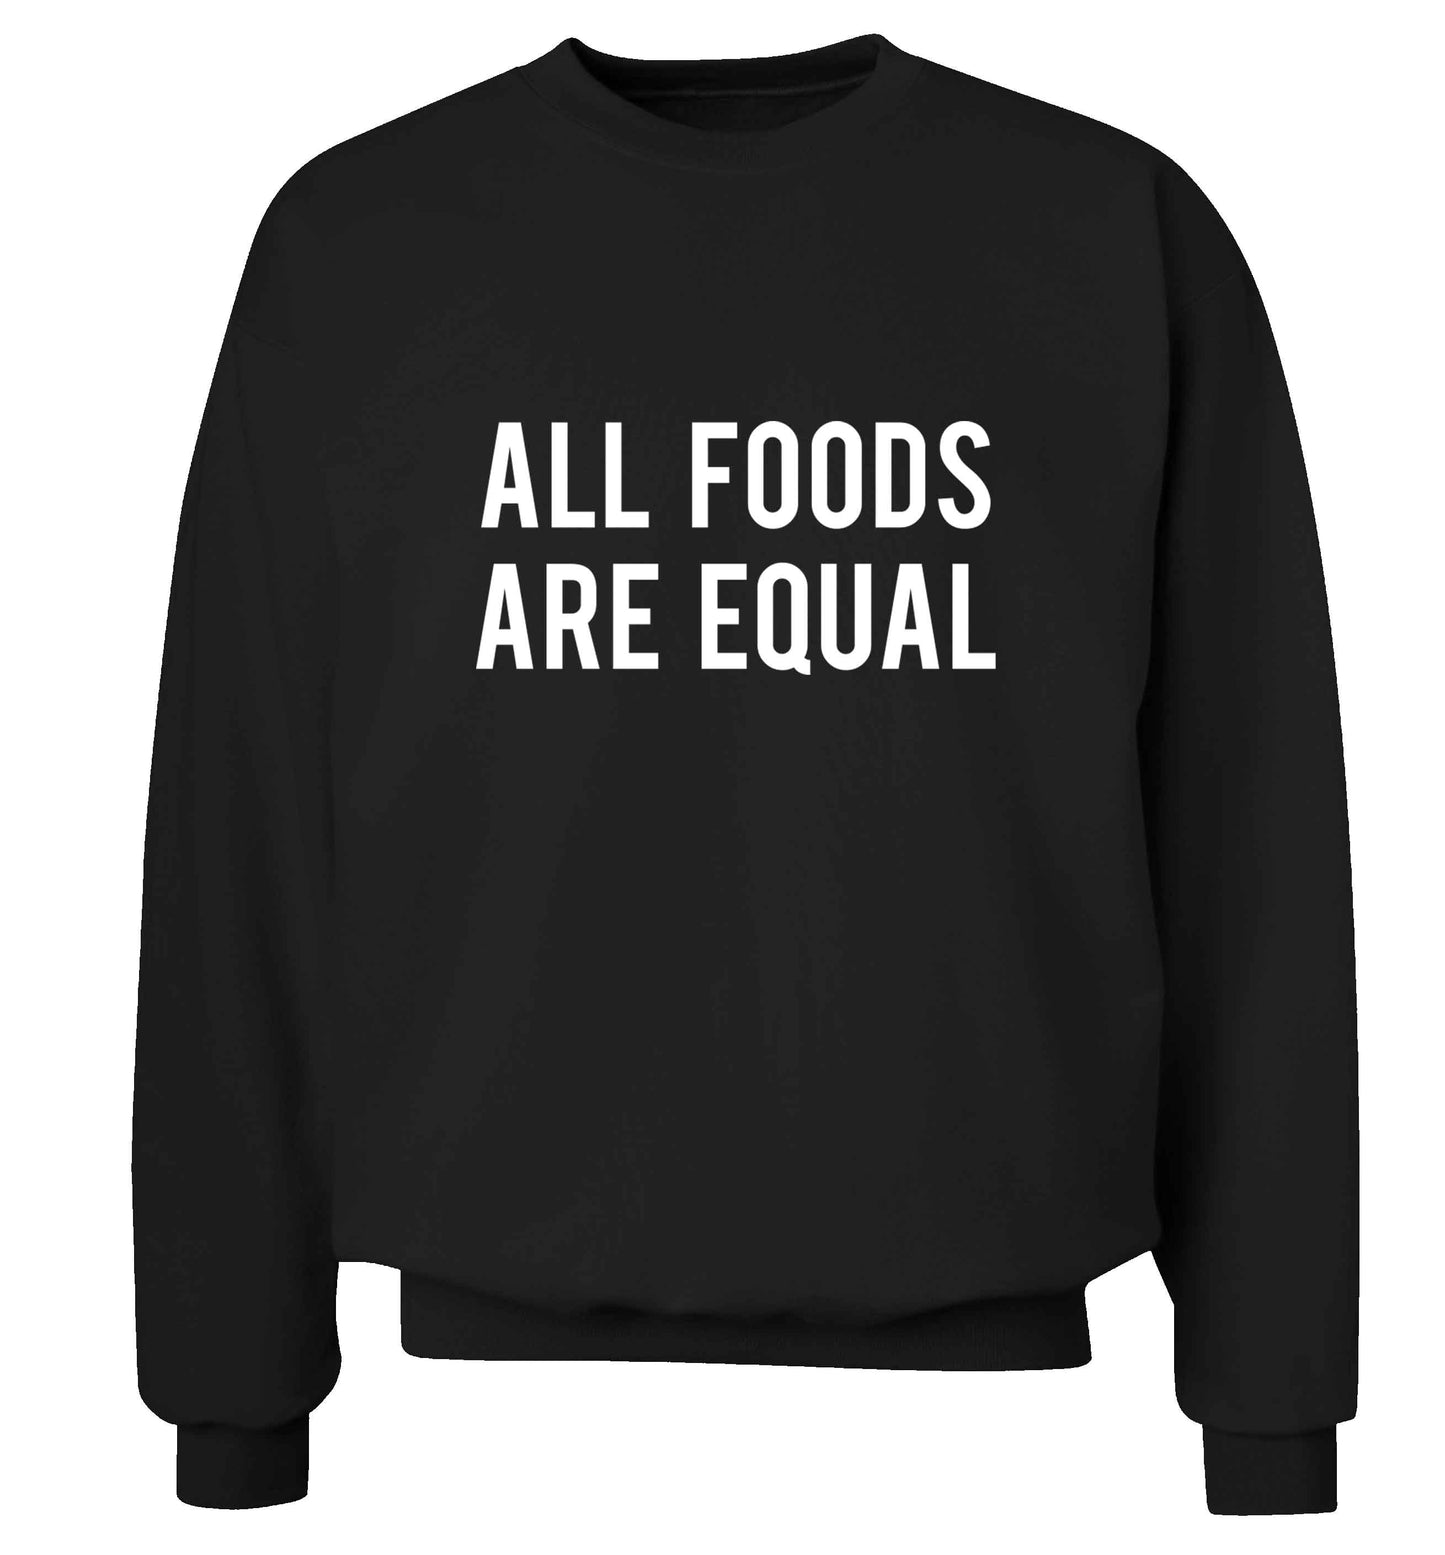 All foods are equal adult's unisex black sweater 2XL